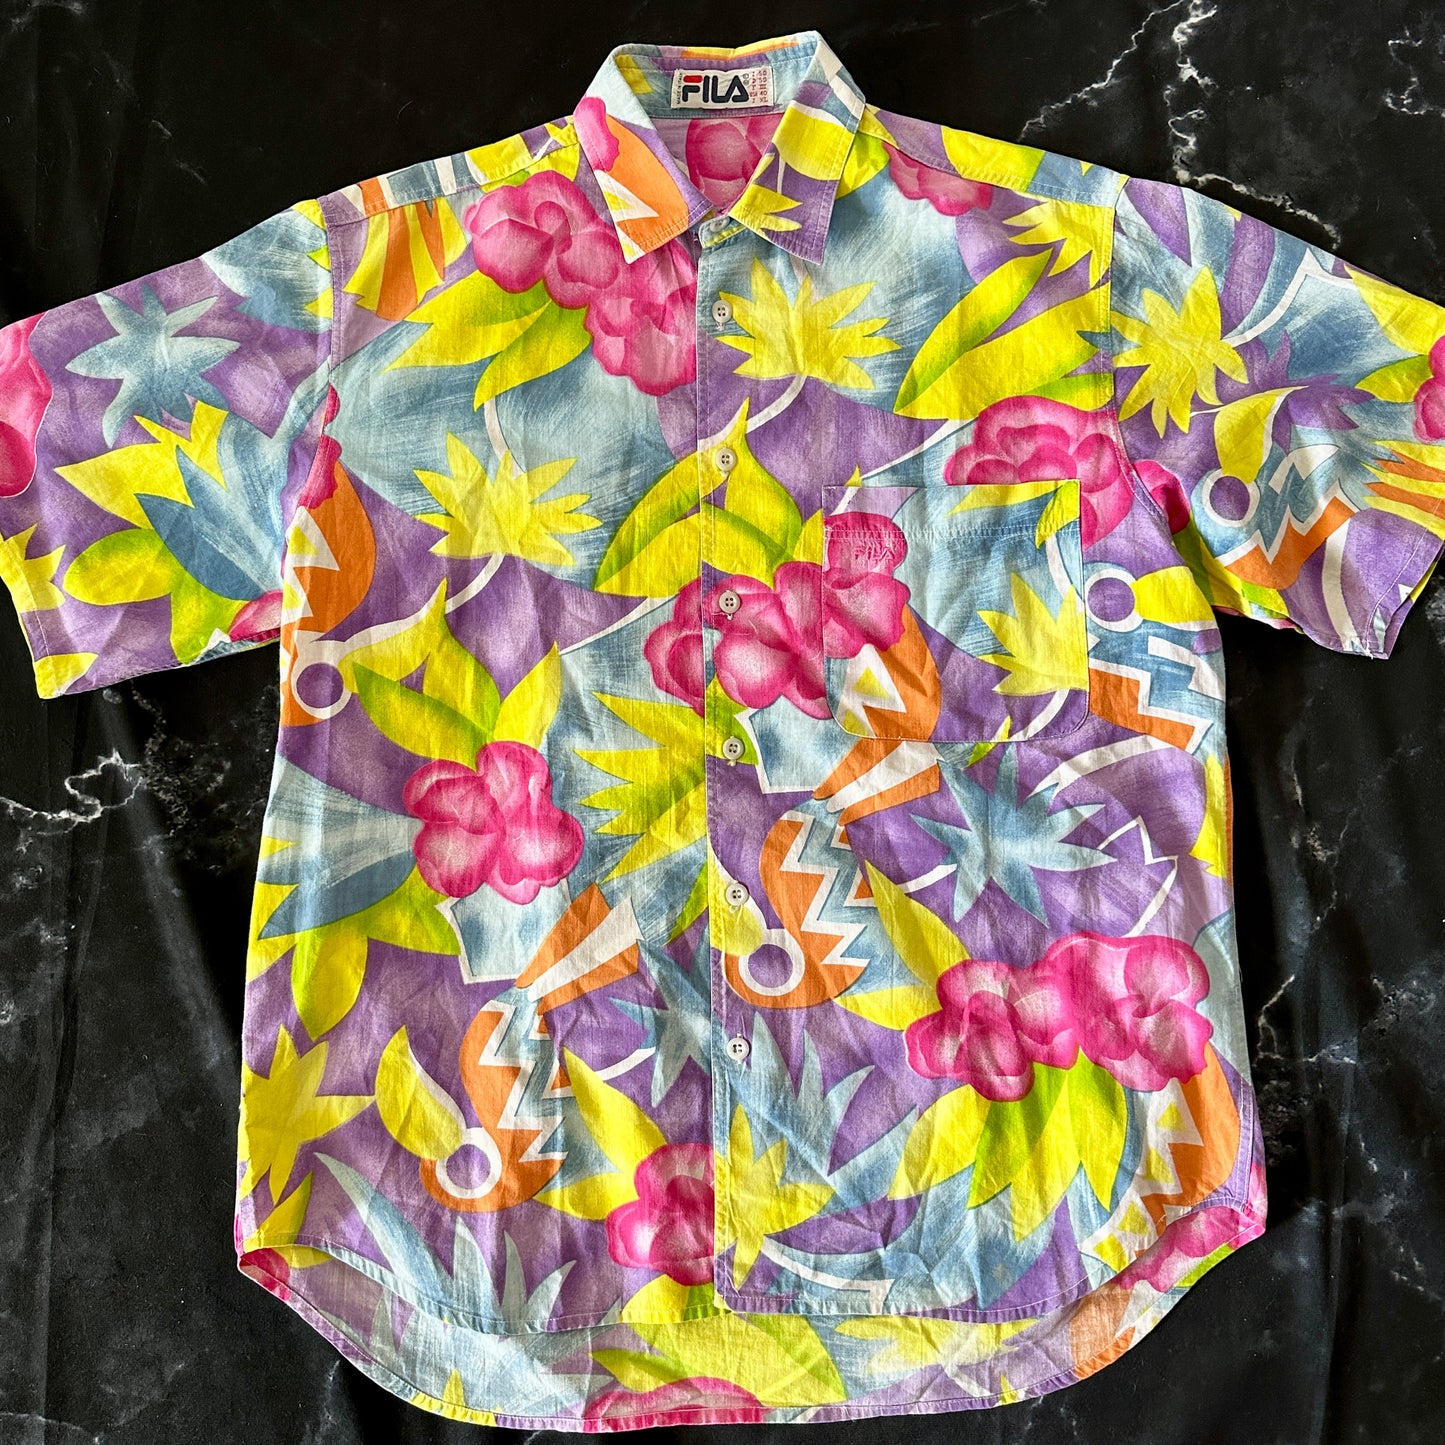 Fila Vintage 1989 Floral Shirt - 50 / M - Made in Italy